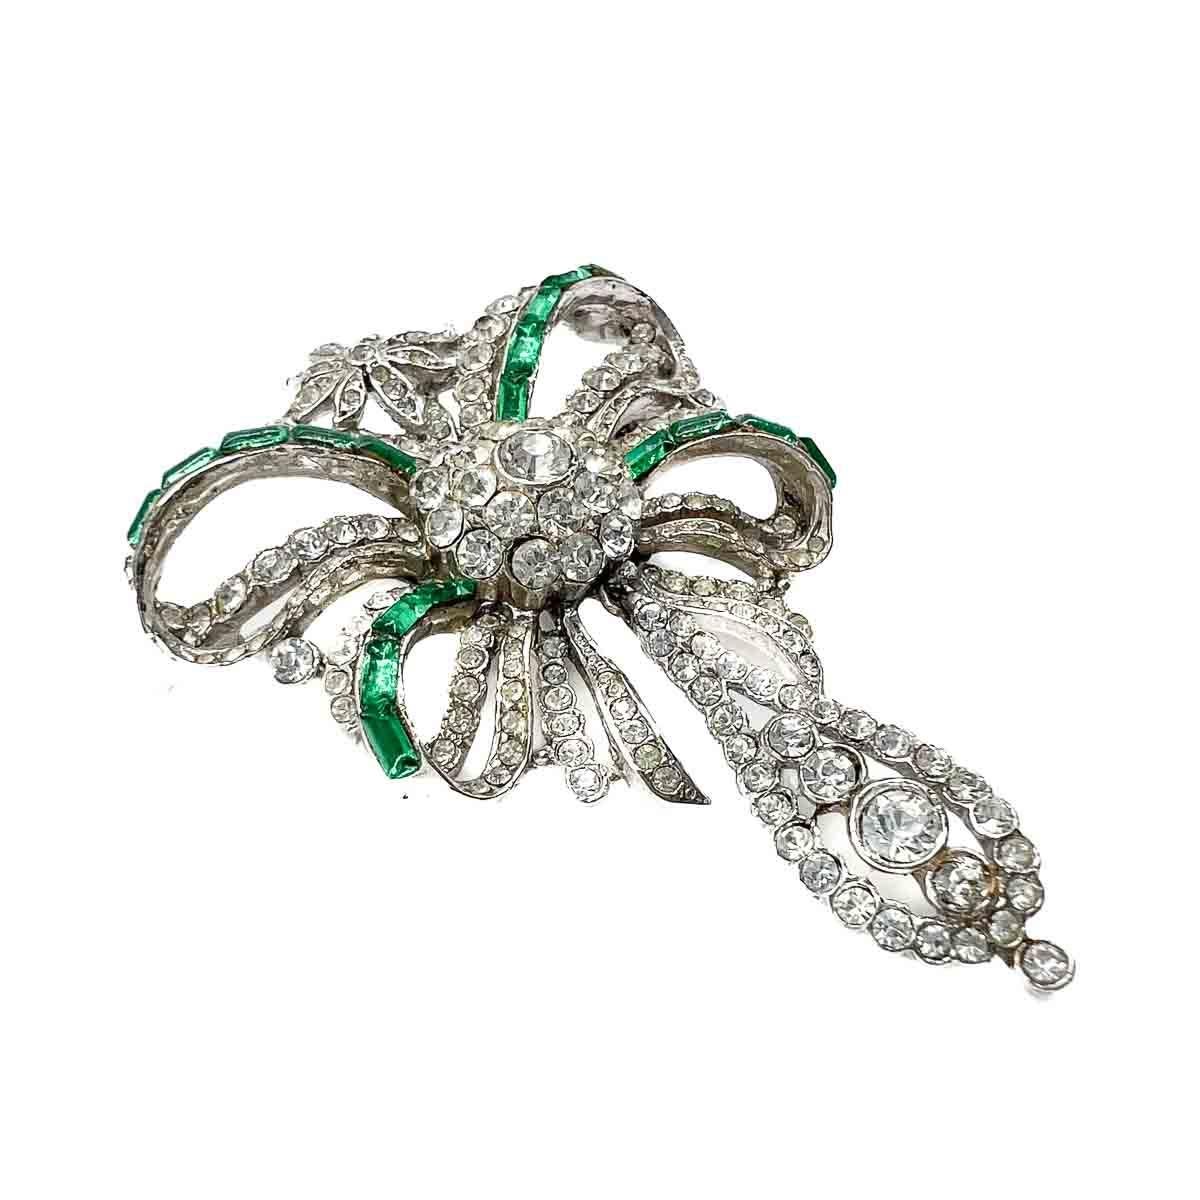 A delightful Vintage Edwardian Inspired Emerald Paste Brooch. Encrusted with stones, the double bow with drop design is eternally stylish and inspired by many aesthetic movements across the centuries, not least the Edwardian period. An elegant find